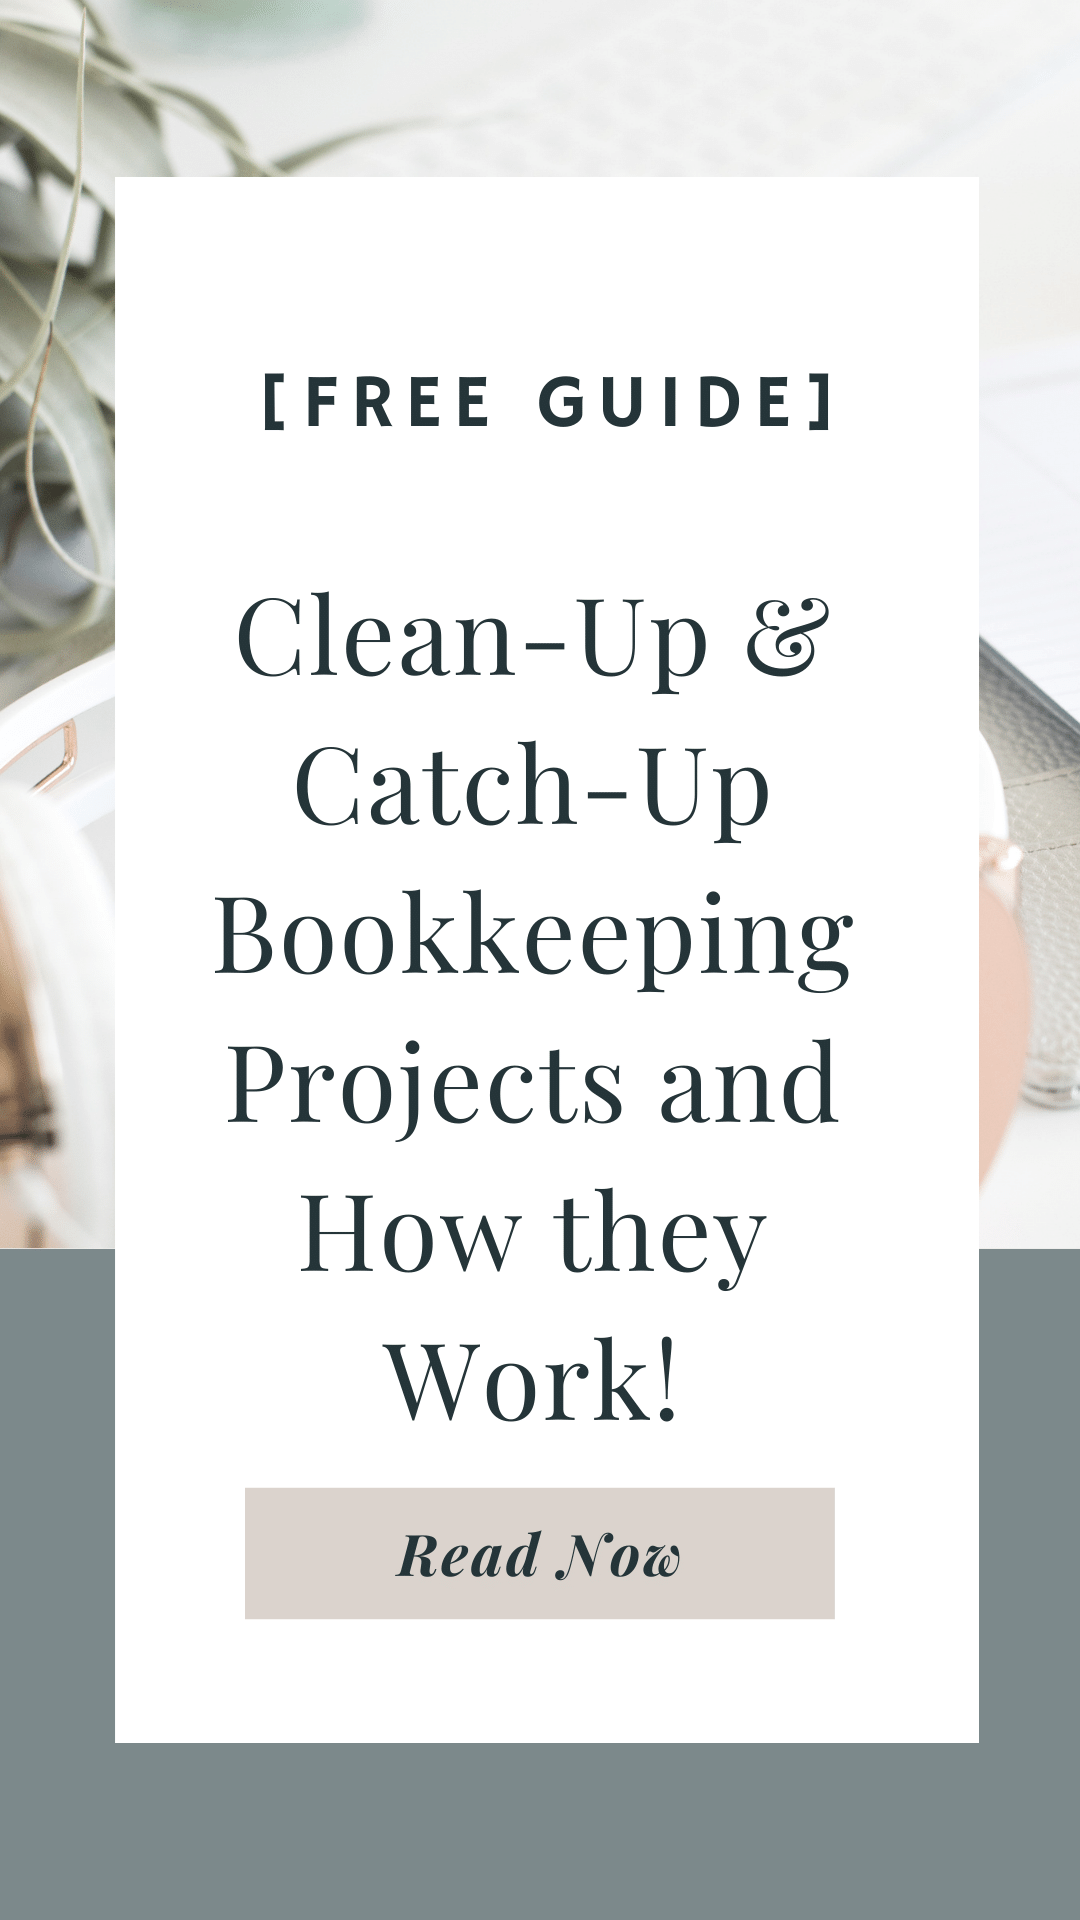 Clean-up-bookkeeping-catch-up-bookkeeping